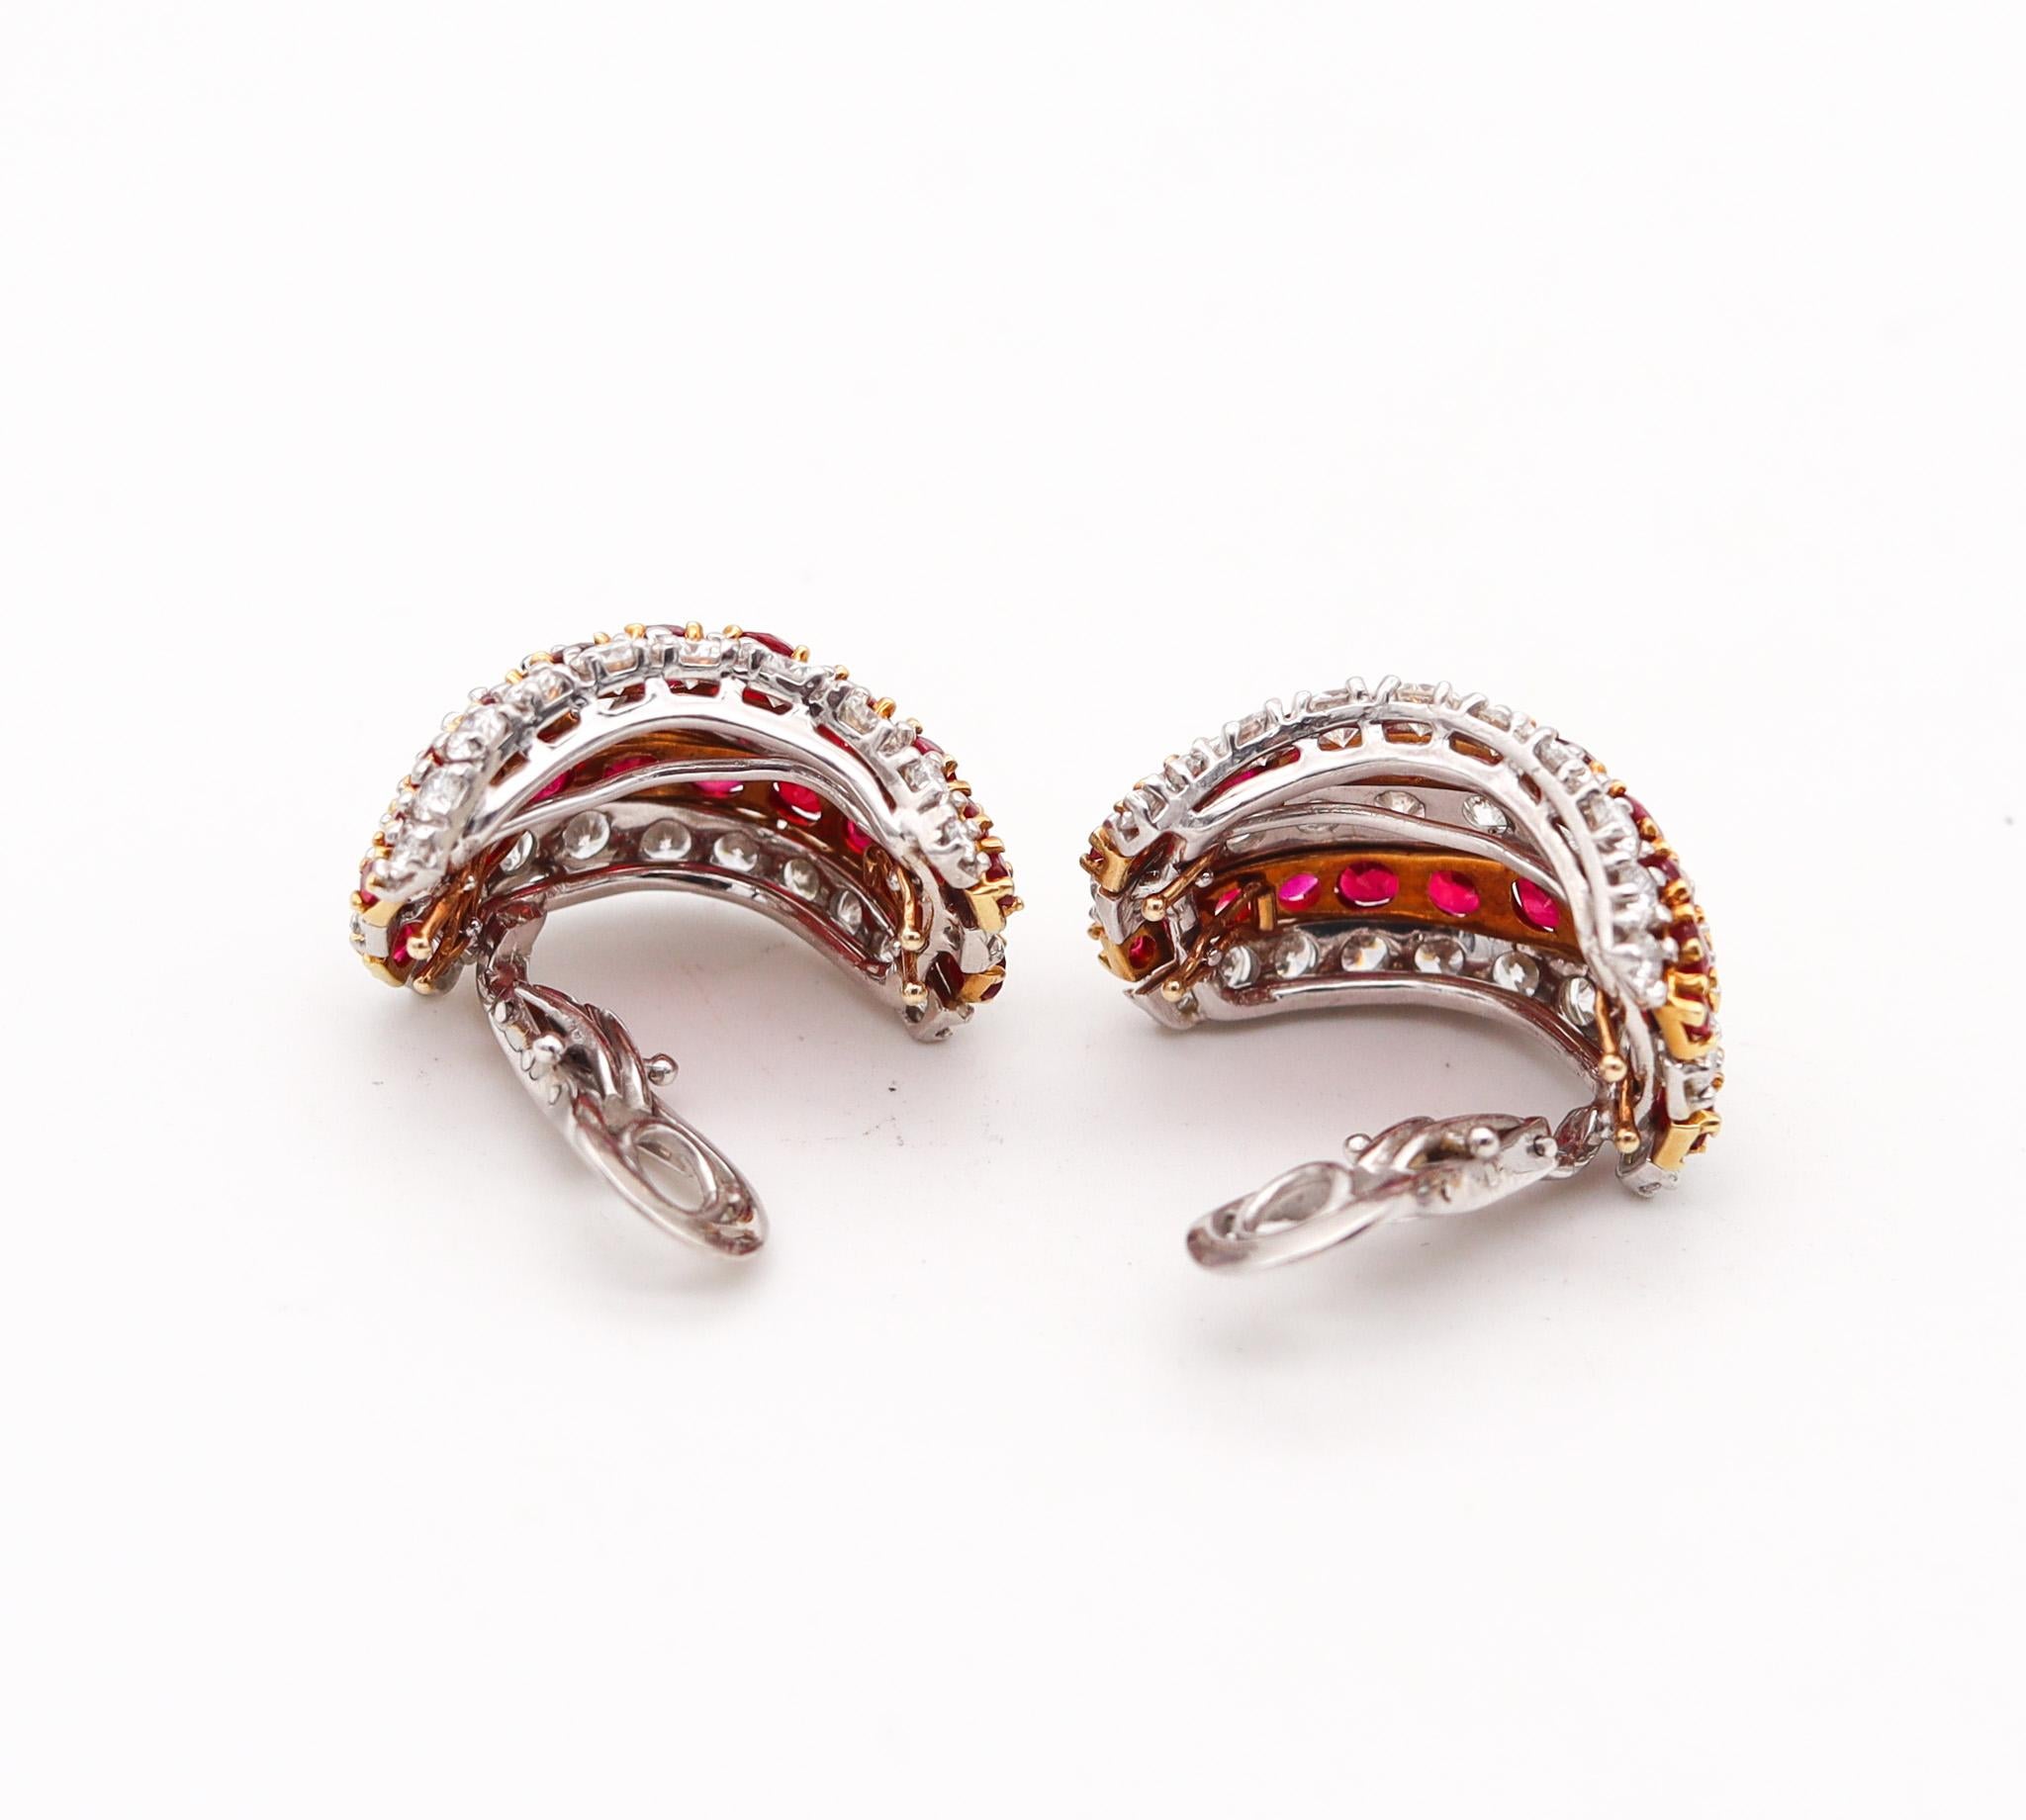 Modernist Kutchinsky 1970 Clip Earrings 18Kt Gold Platinum And 21.02 Ctw Diamonds & Rubies For Sale